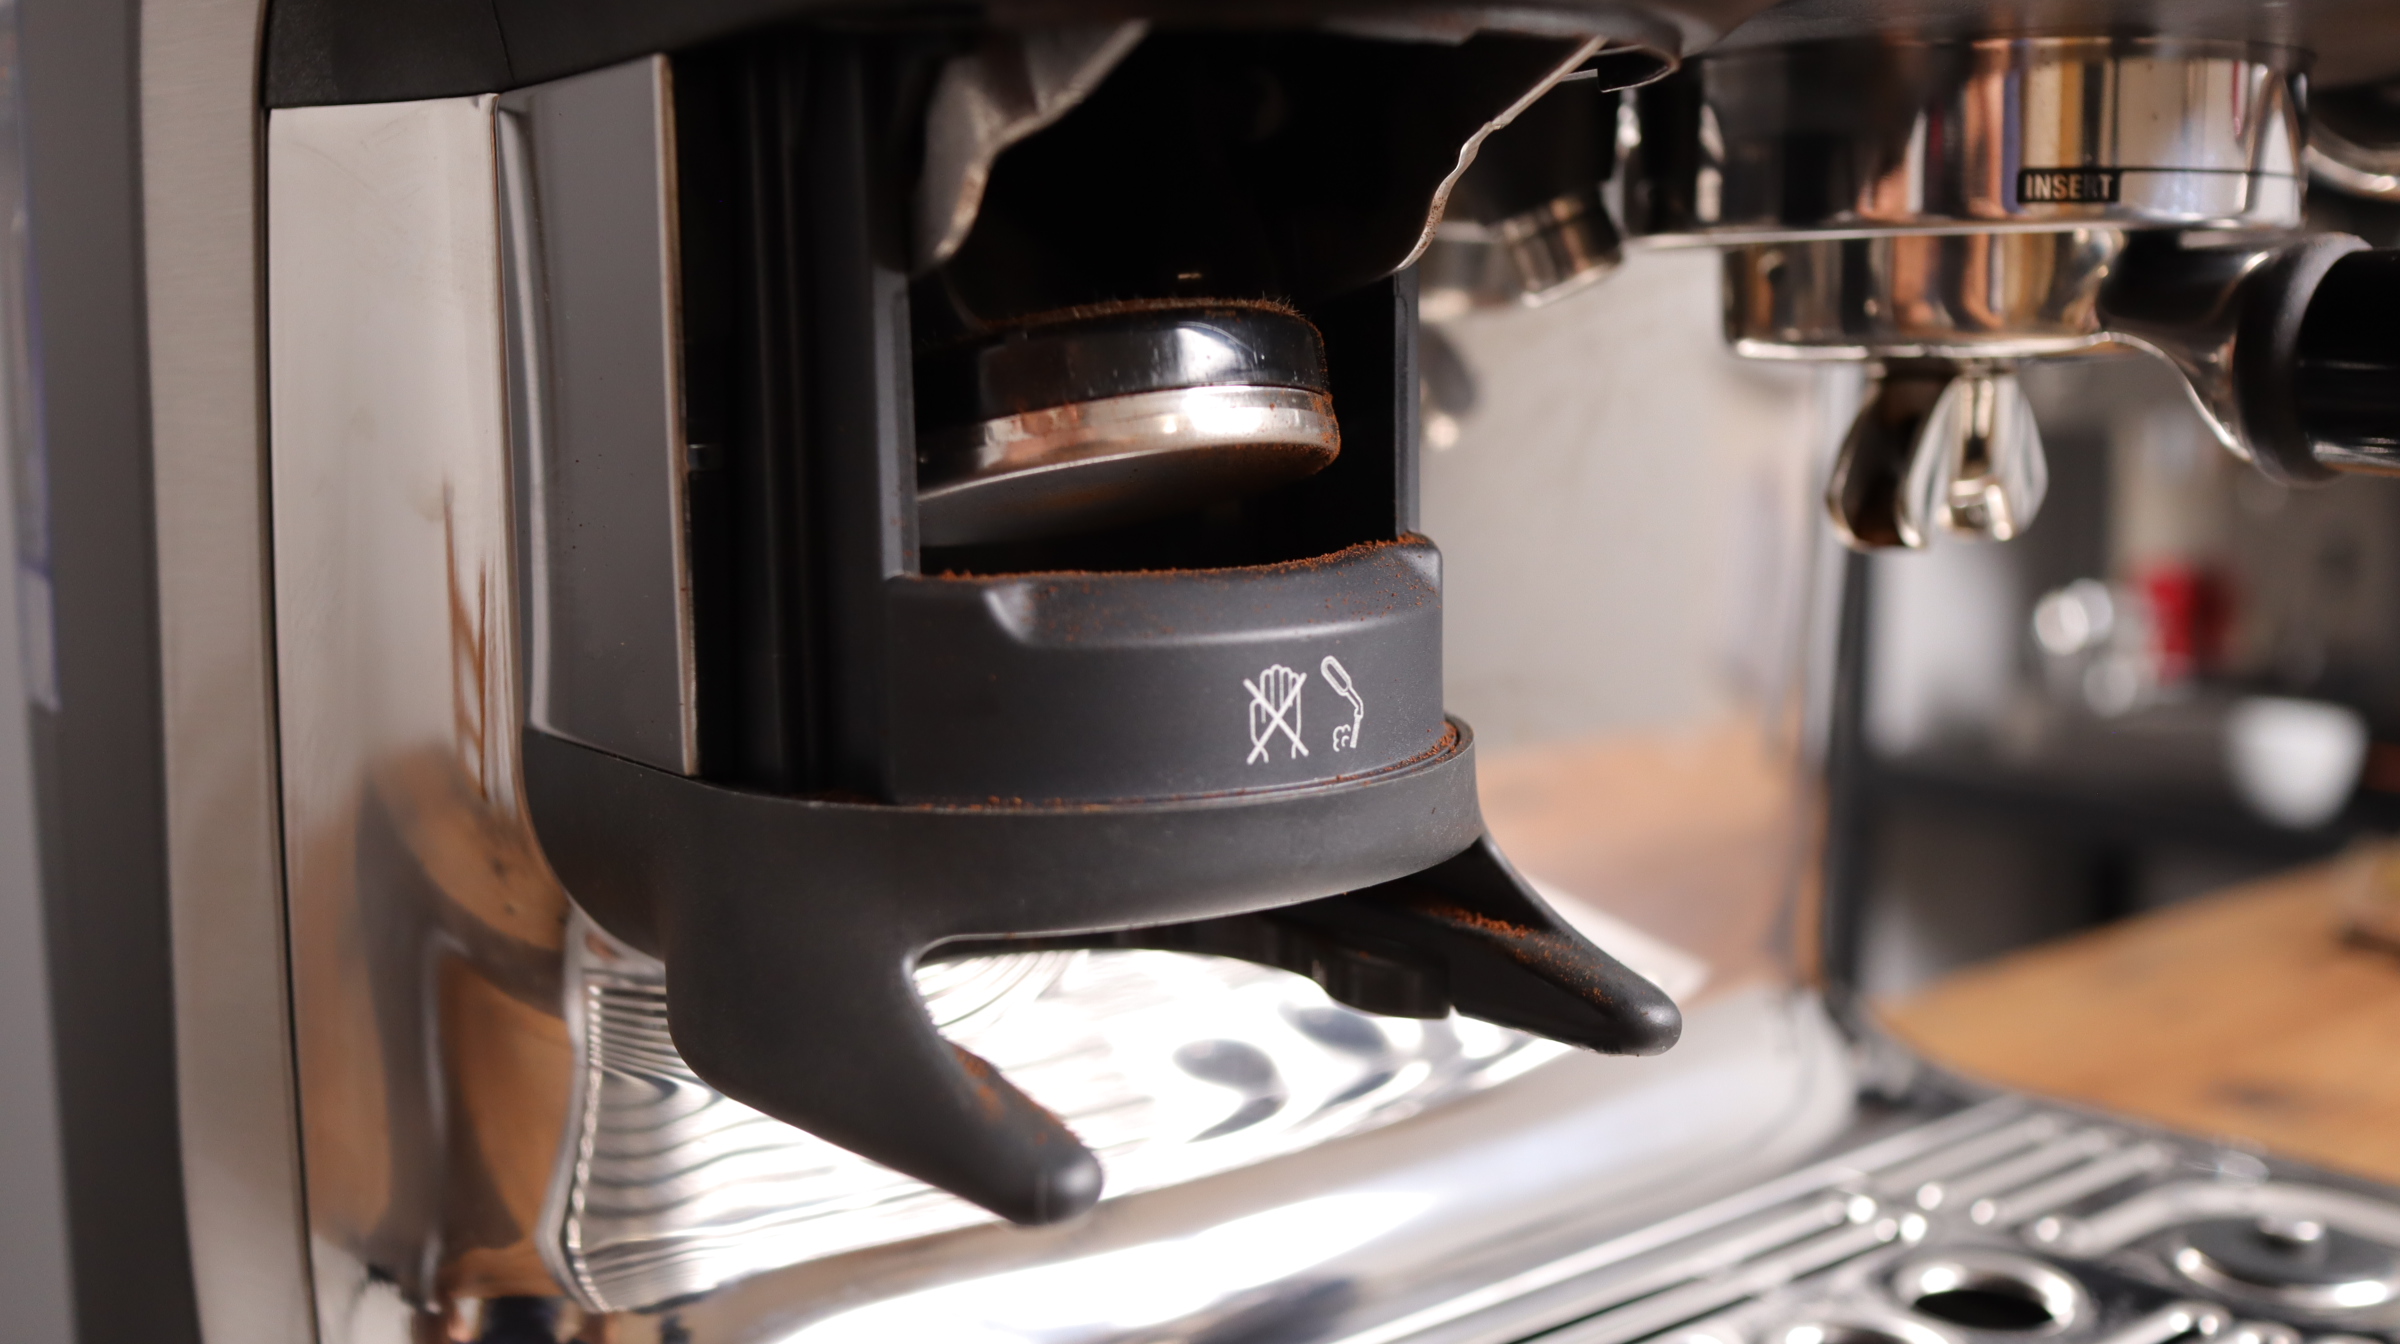 Tamping system on Breville Barista Touch Impress